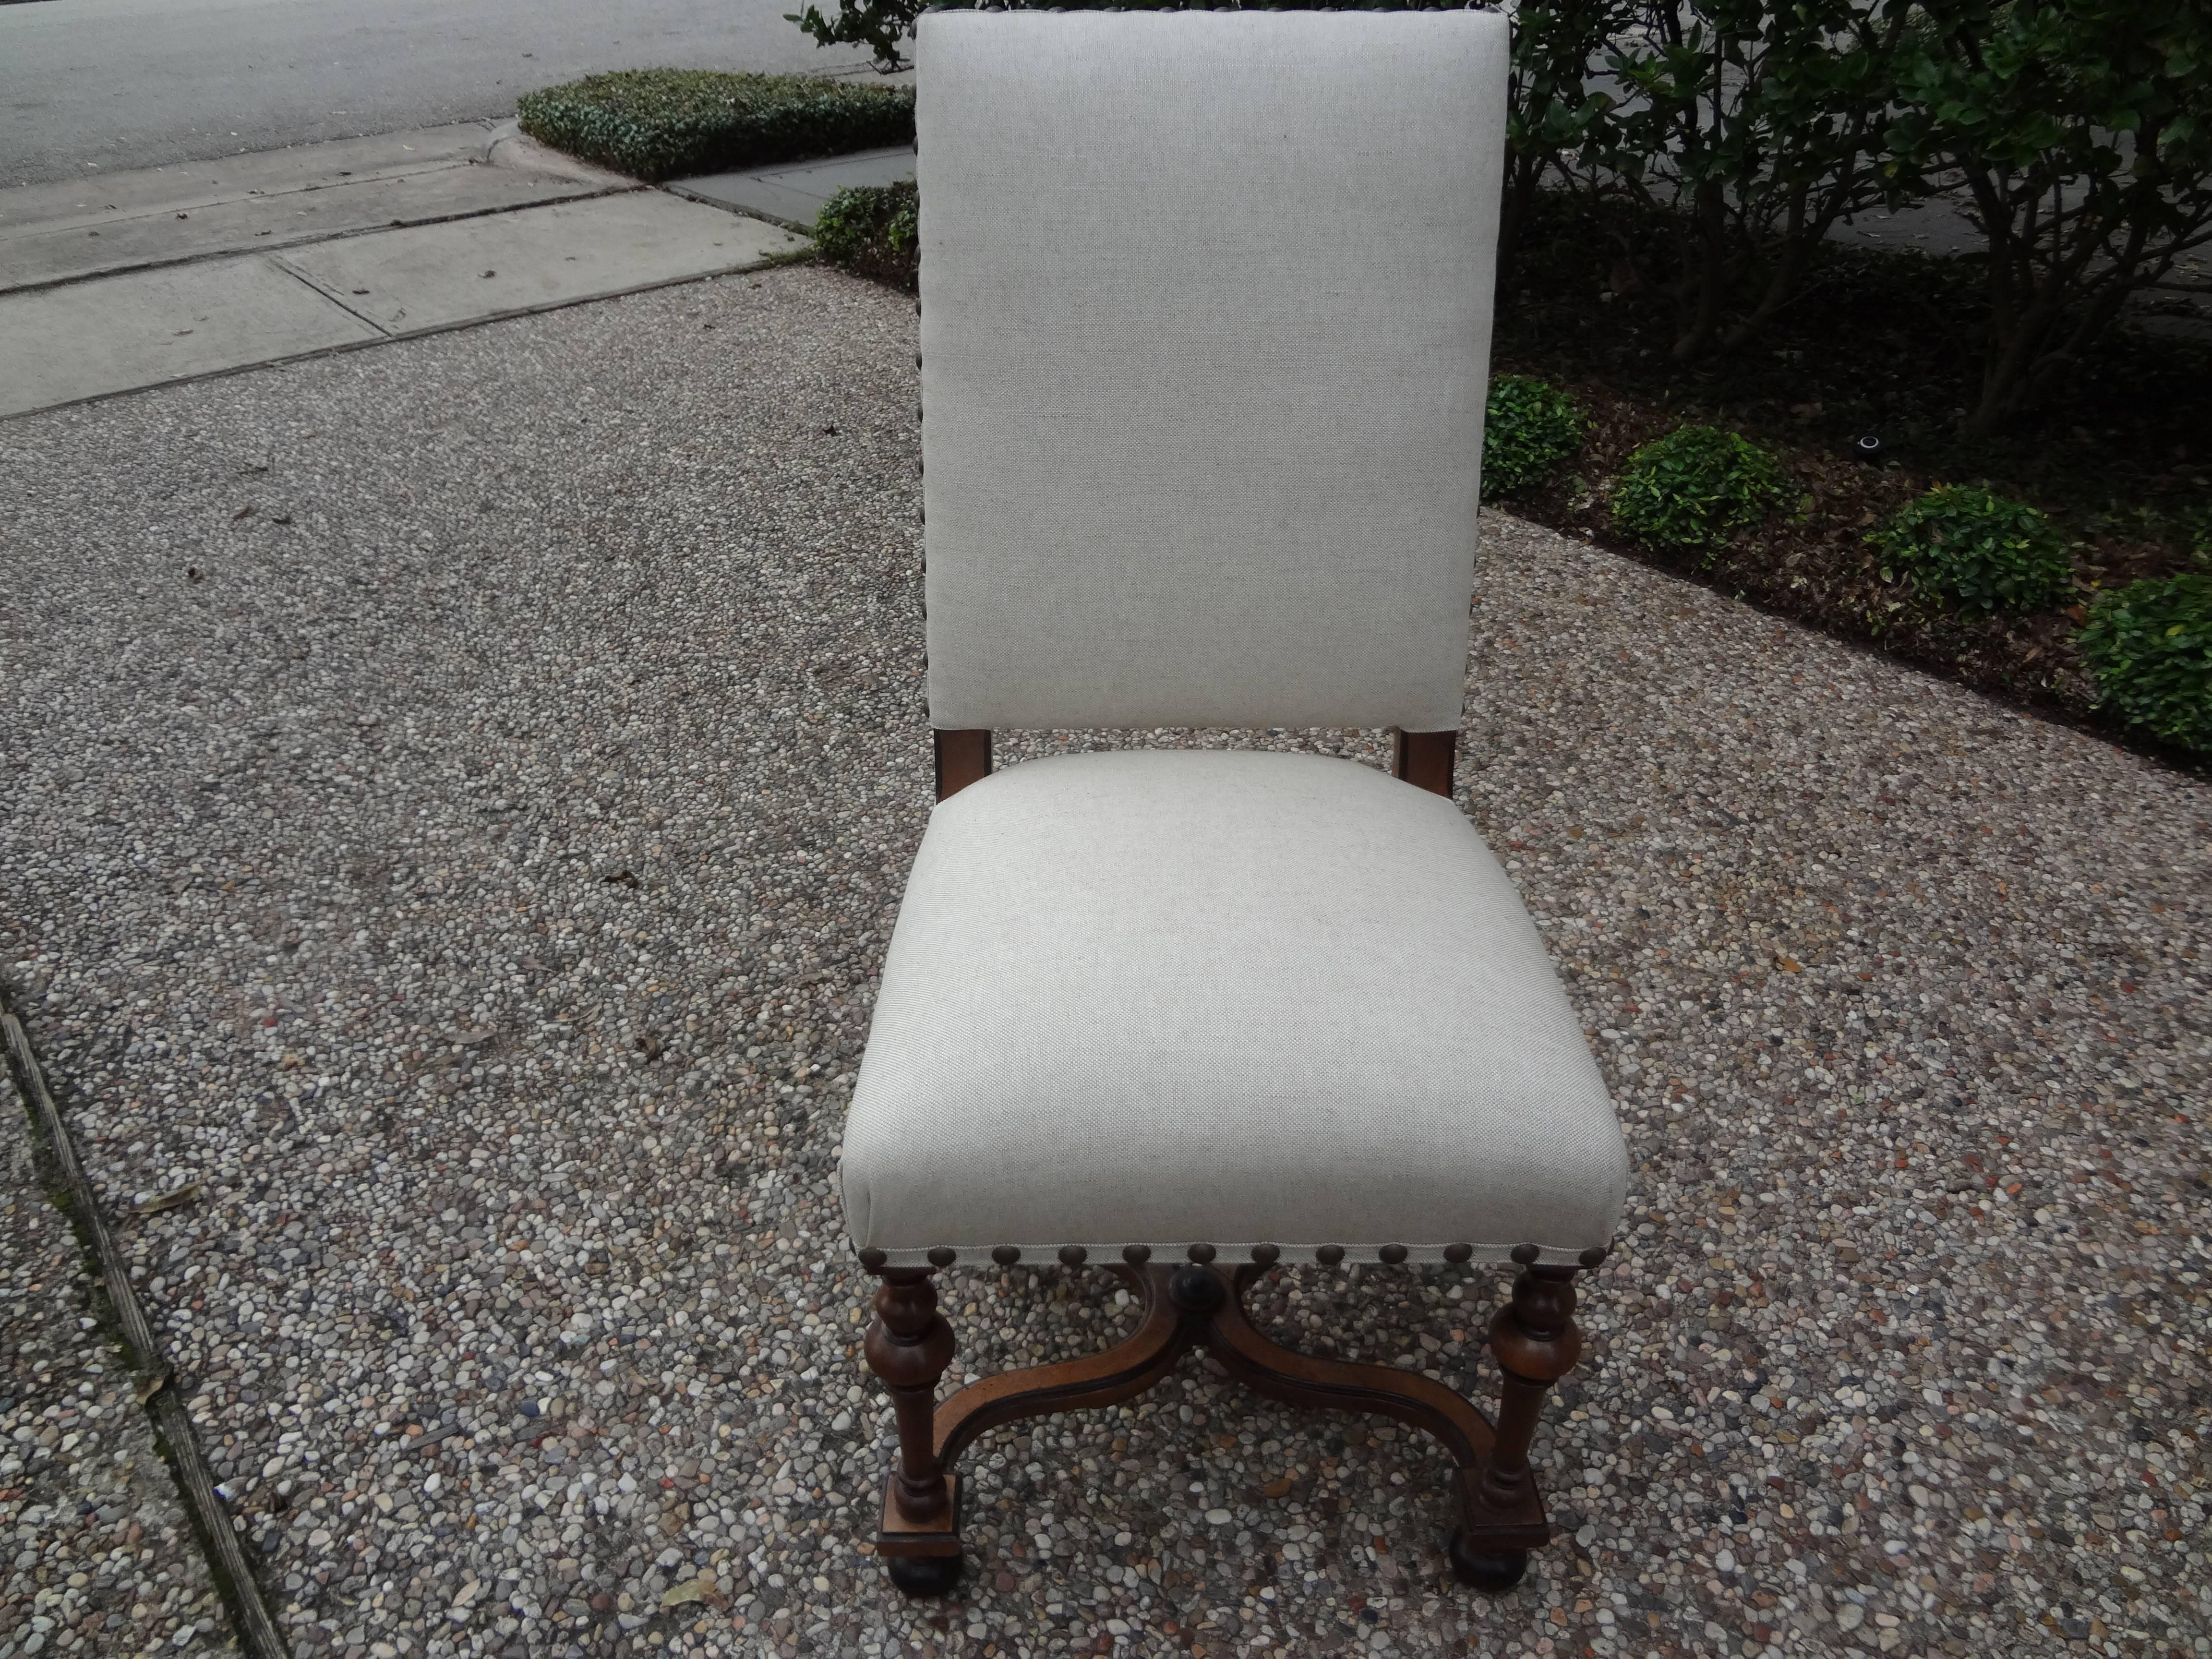 Well made 19th century French Louis XIV style walnut dining chairs newly upholstered in oatmeal linen with French brass spaced nailhead detail.

Please click KIRBY ANTIQUES logo below to view additional pieces from our vast inventory.

